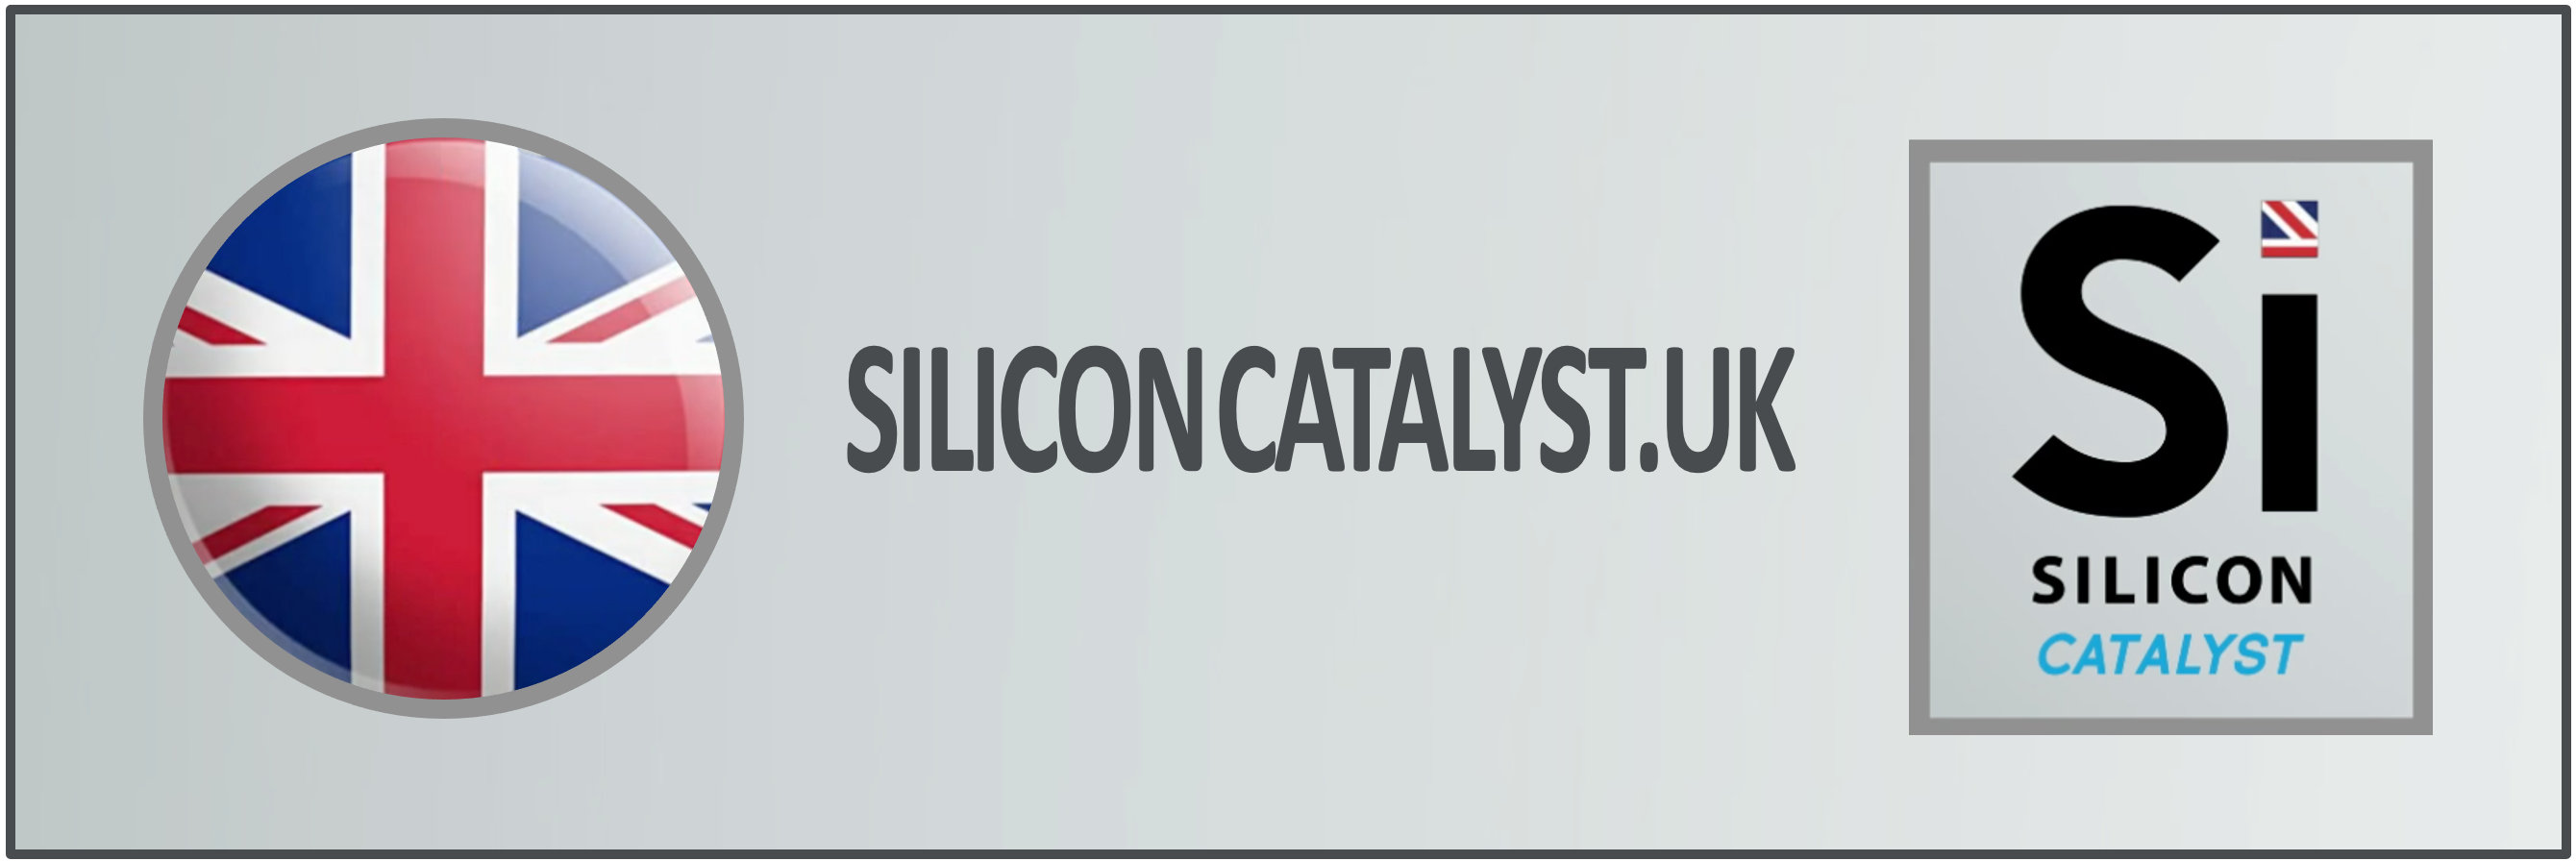 Silicon Catalyst is Bringing Its Unique Startup Platform to the UK